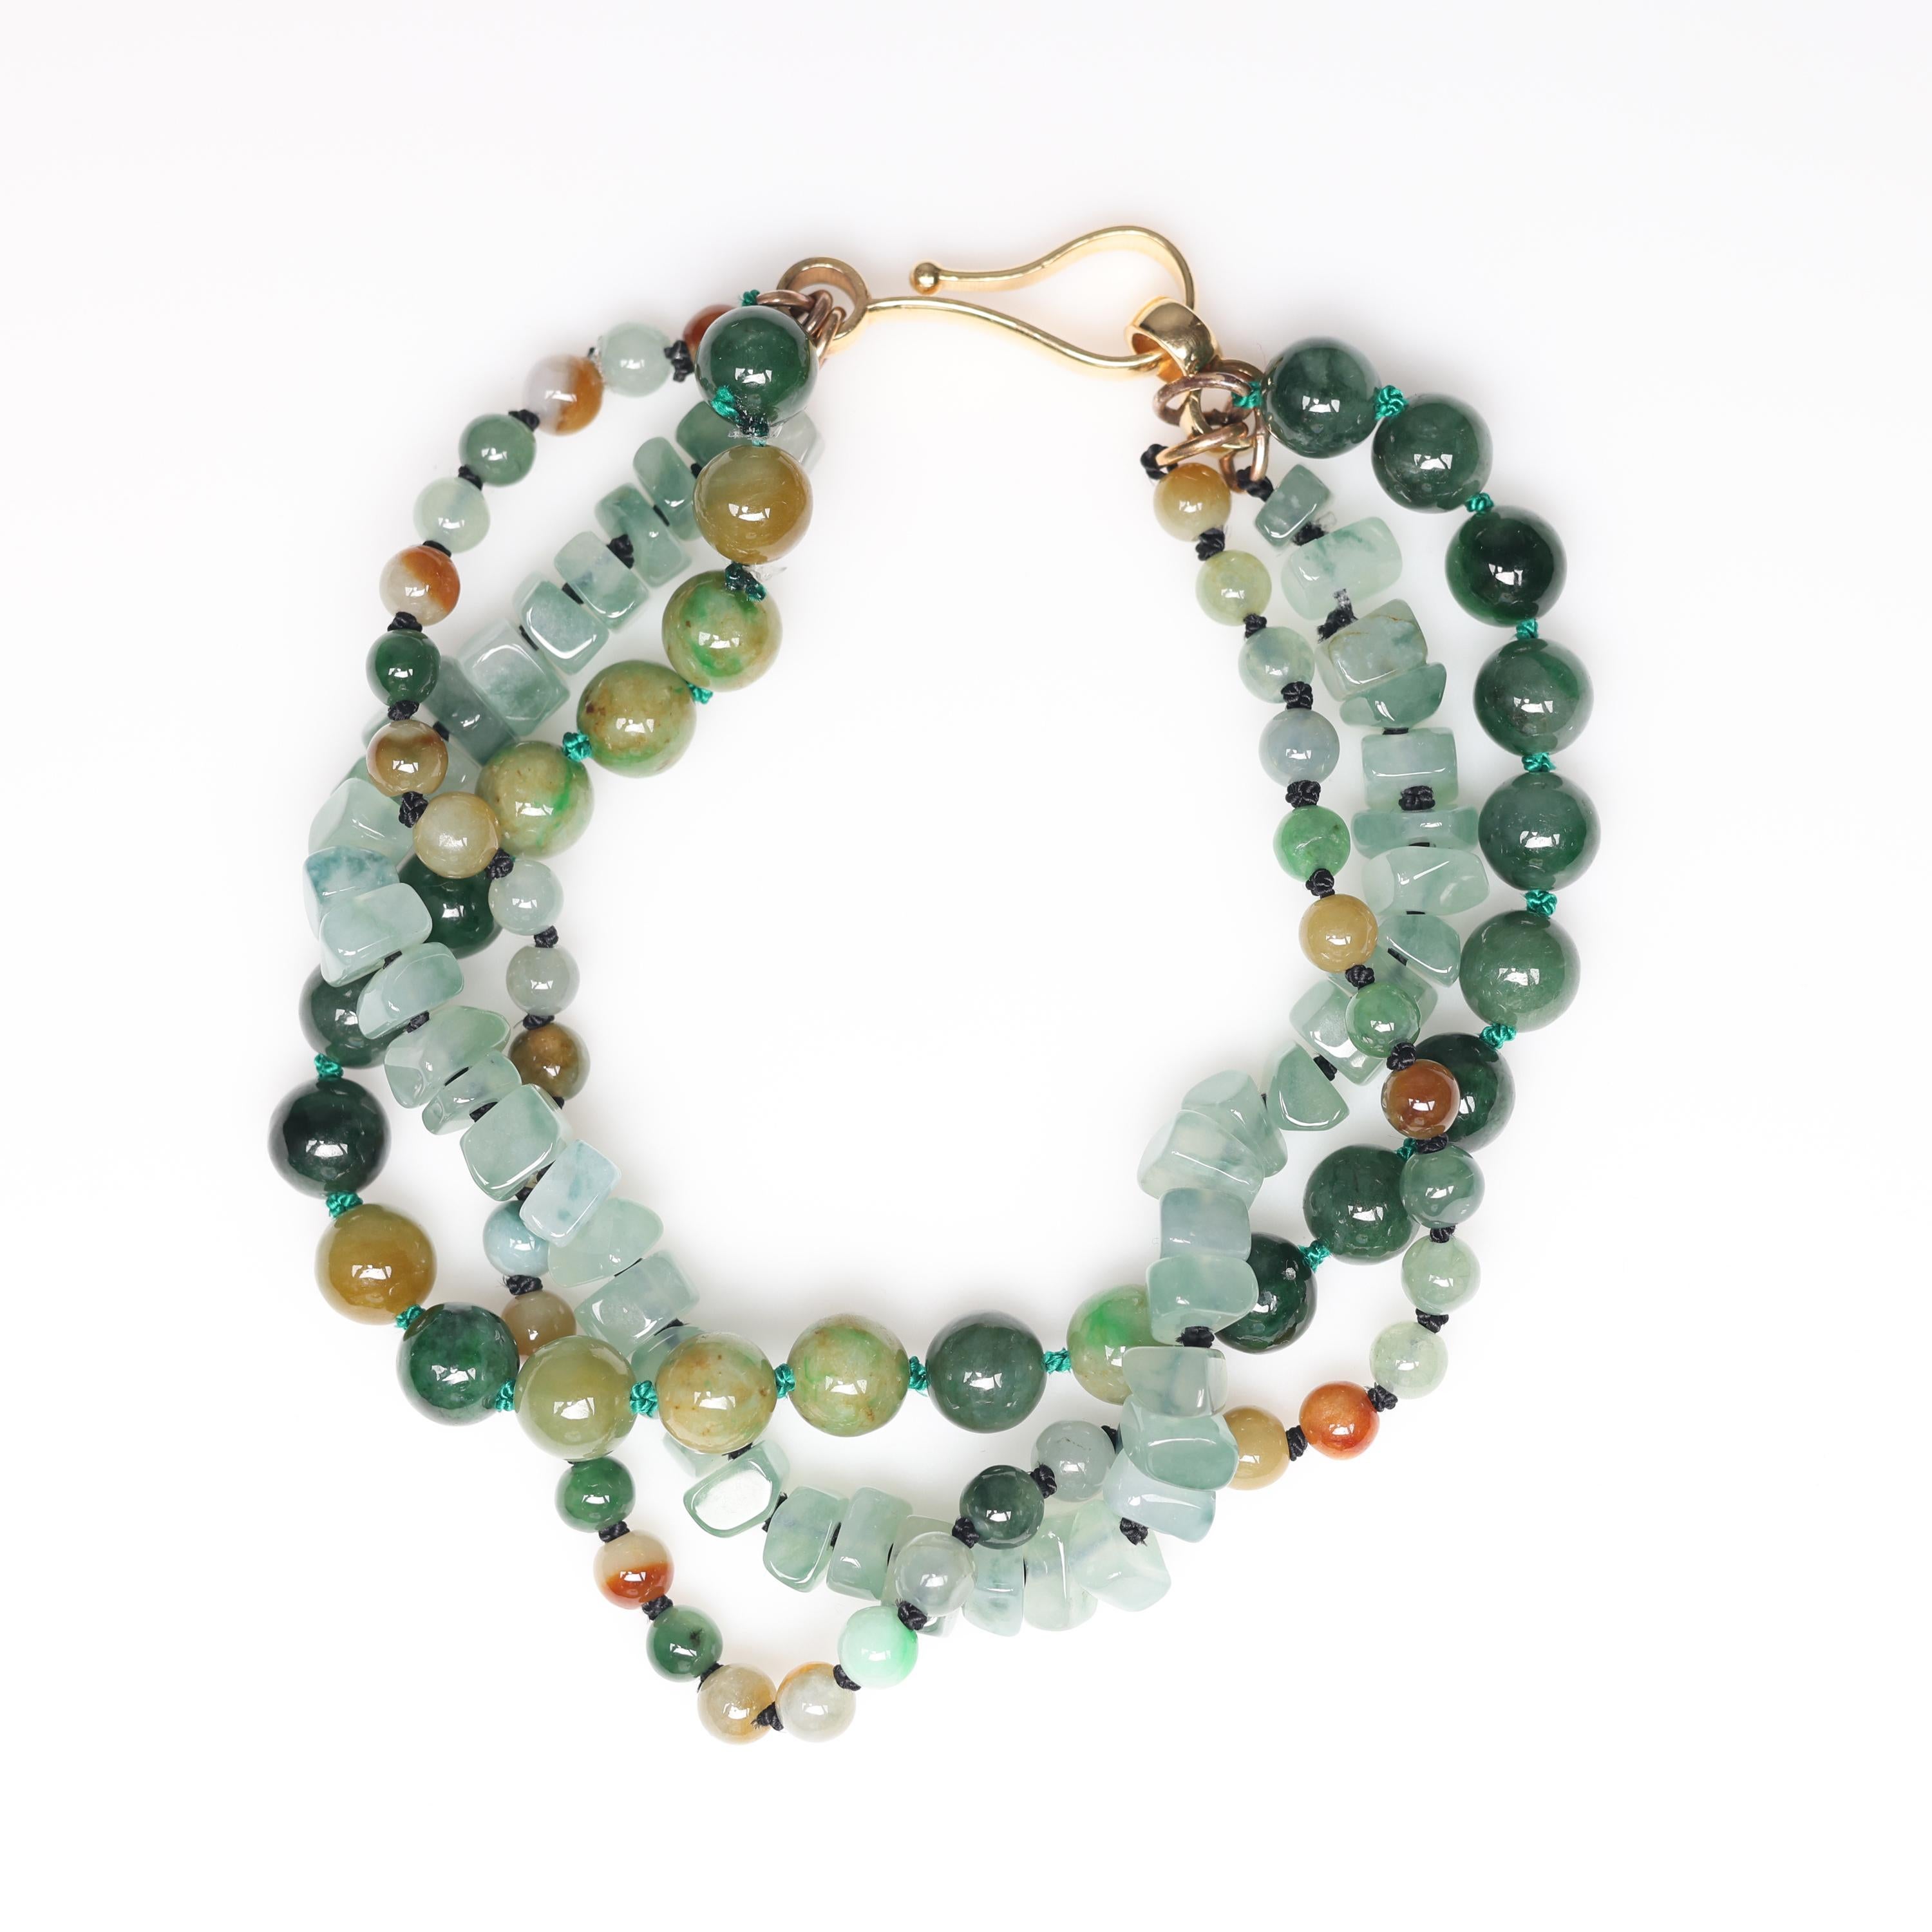 This brand new beaded jade bracelet features both jadeite jade and omphacite jade beads. The three strands of beads are strung on silk and knotted between each bead. One strand contains freeform jade beads and the other two feature round beads that